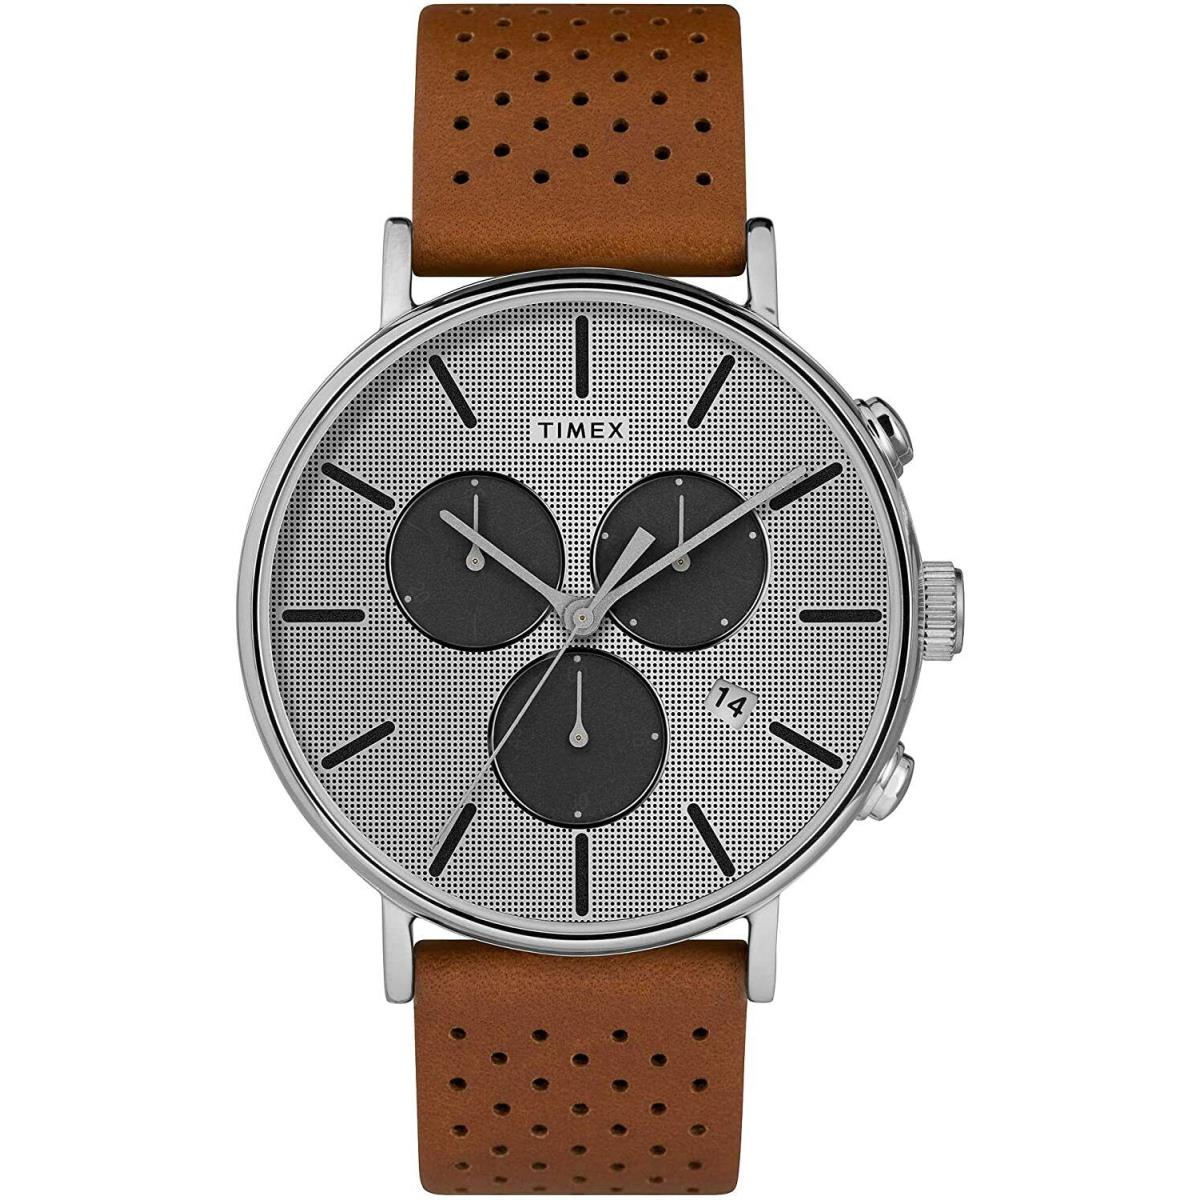 Timex Fairfield Silver Dial Brown Chronograph Men s Watch TW2R79900 - Dial: Gray, Band: Brown